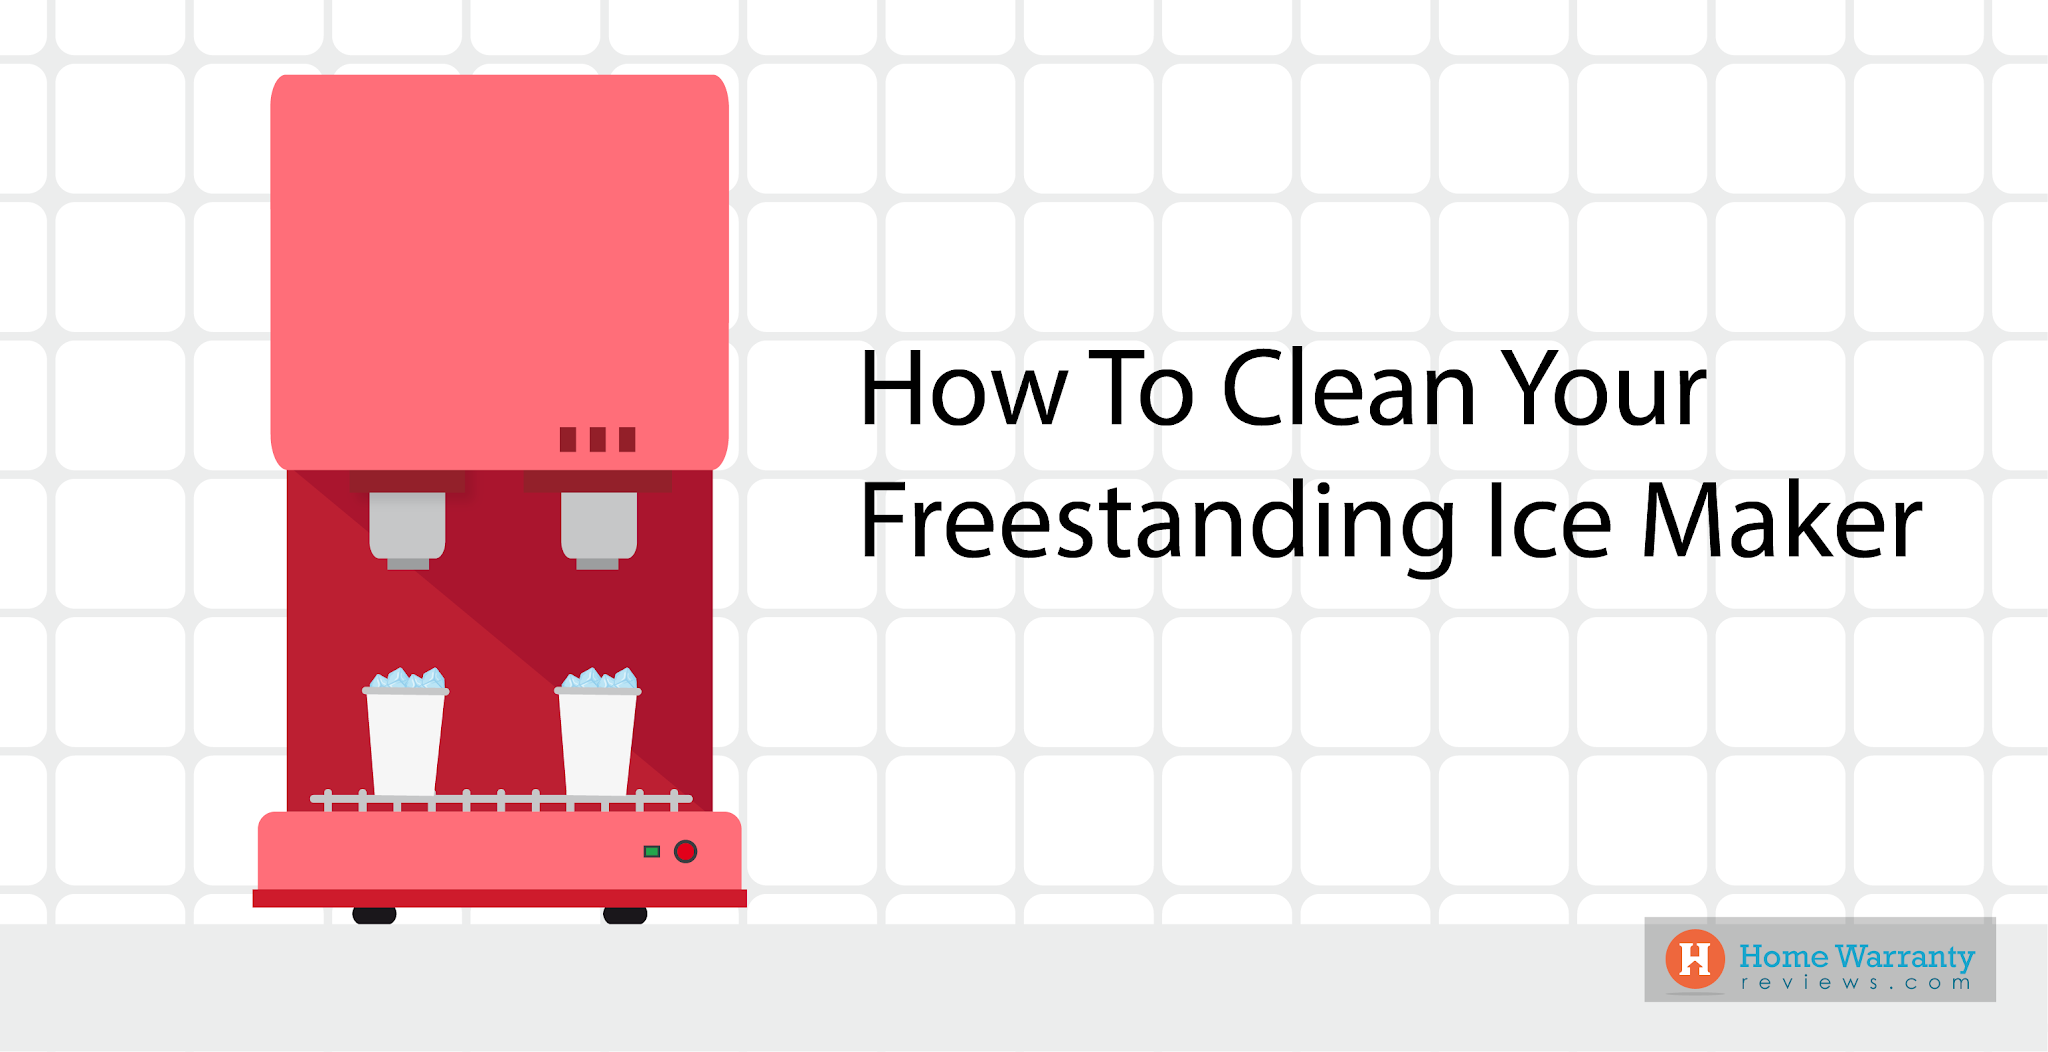 How To Clean Your Freestanding Ice Maker